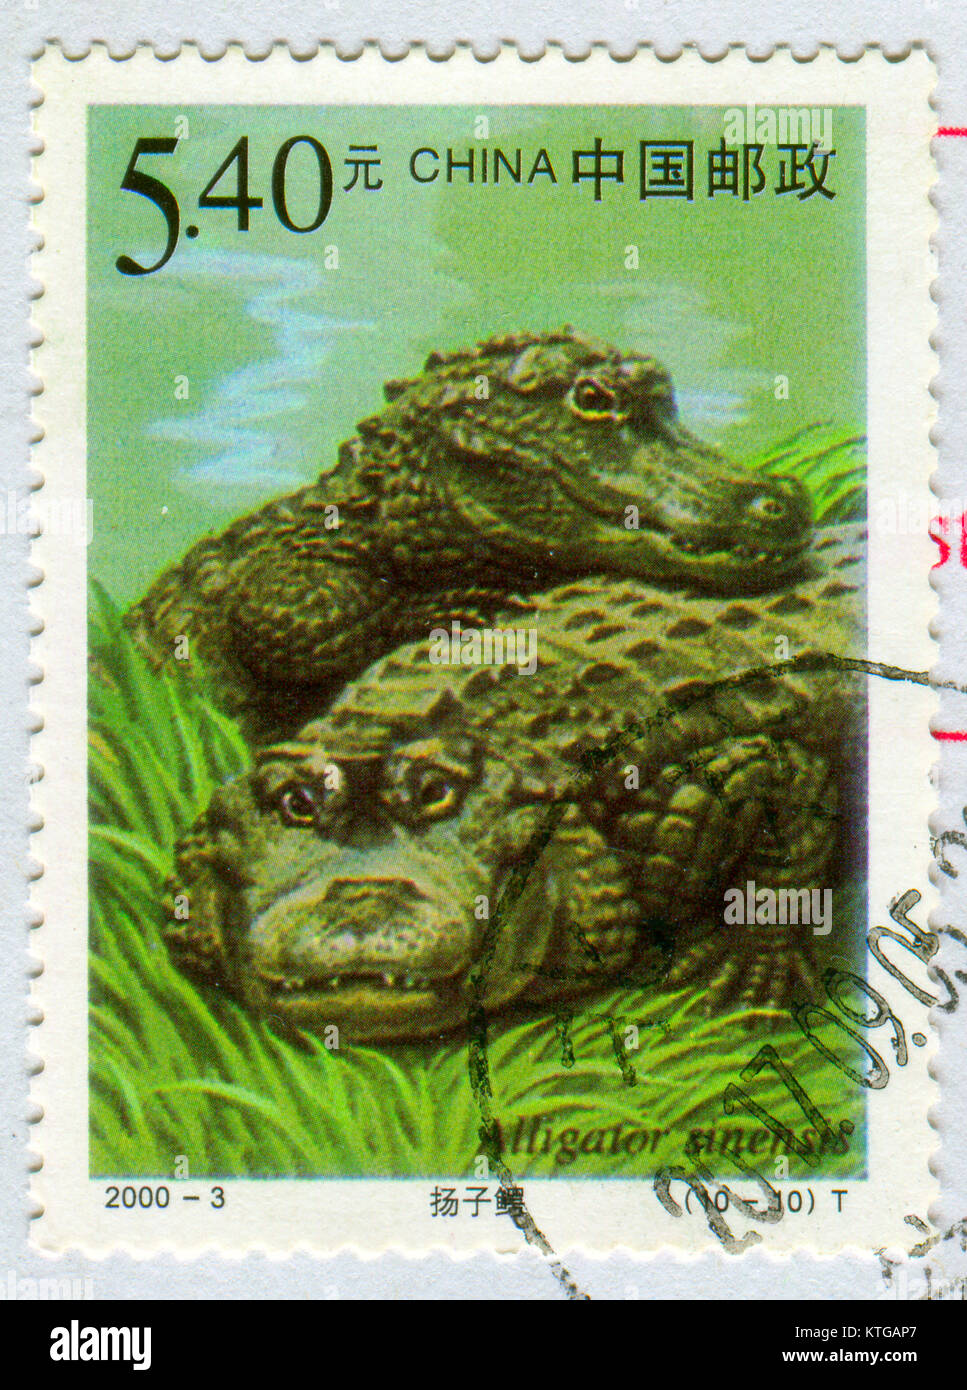 GOMEL, BELARUS, 27 OCTOBER 2017, Stamp printed in China shows image of the Alligator sinensis, circa 2000. Stock Photo